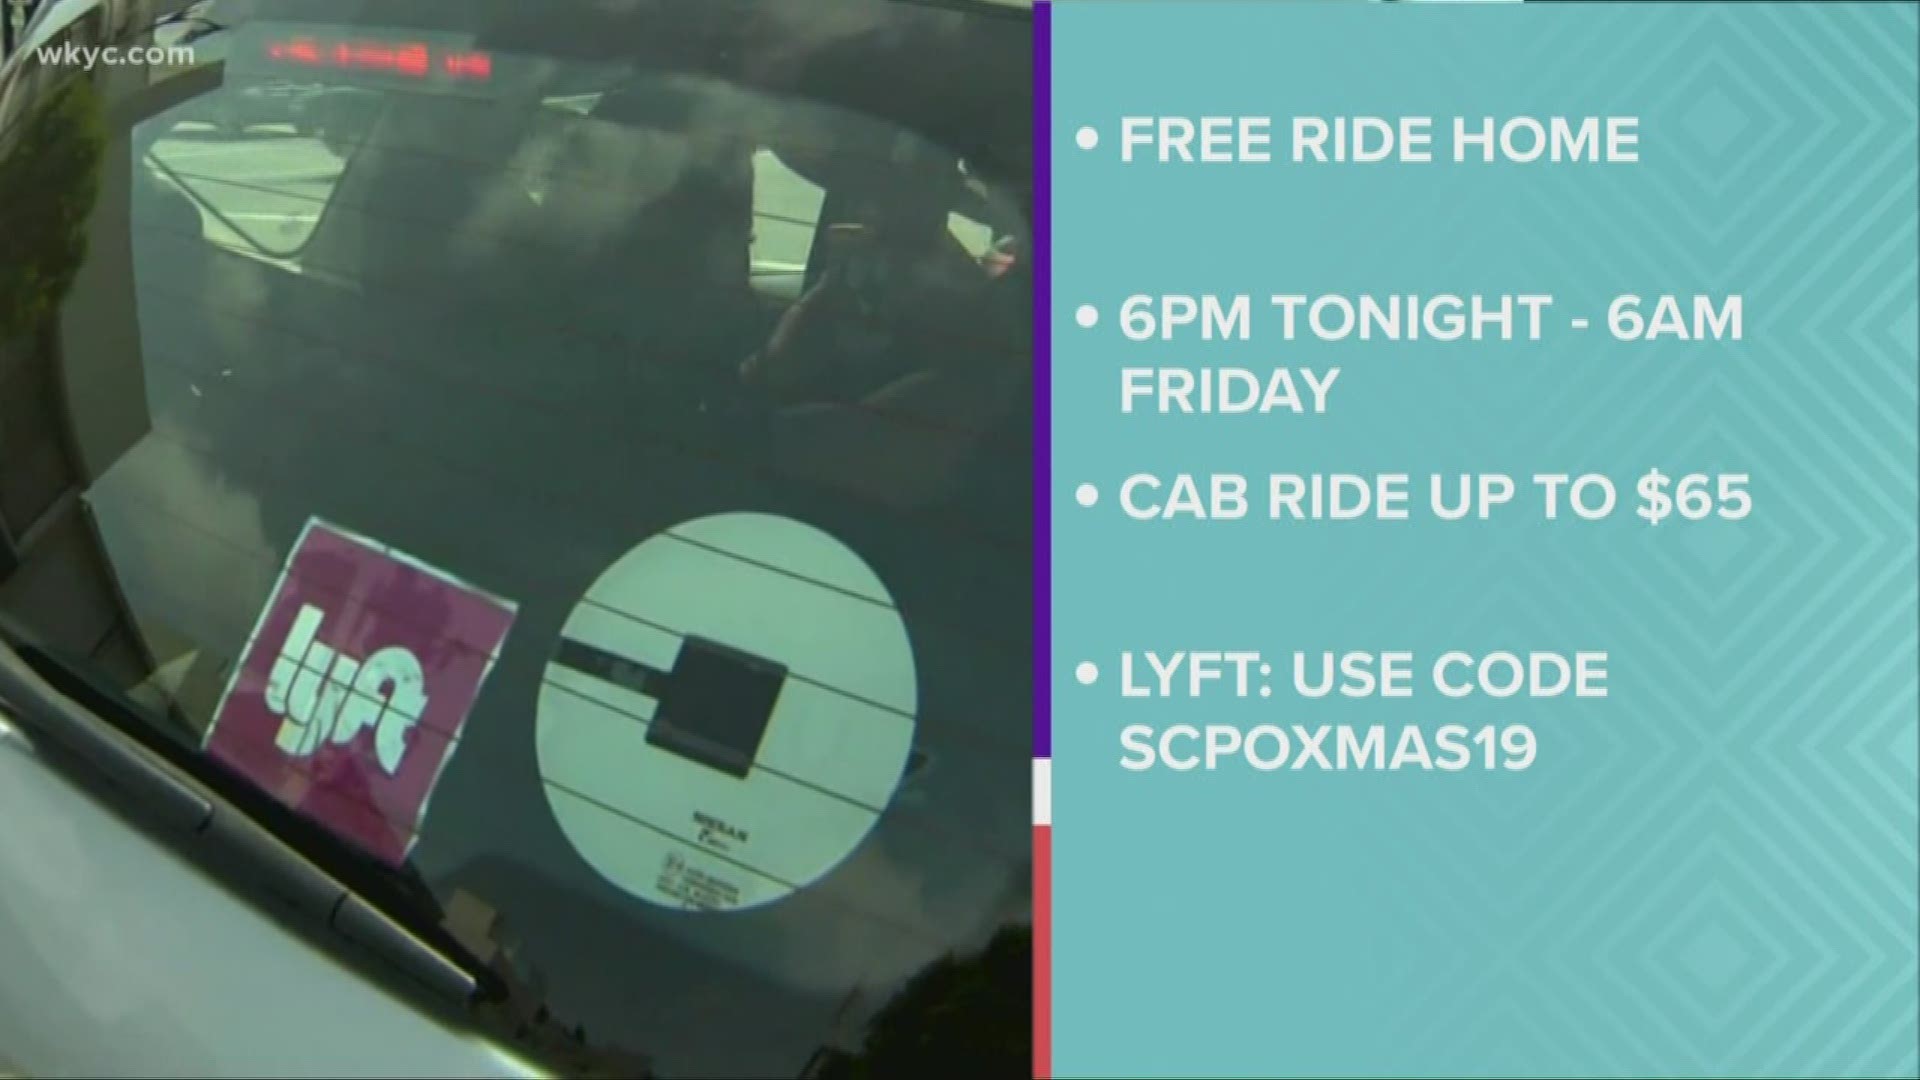 Get a free ride home in Summit County with City Yellow Cab and Lyft. The program runs now until Friday at 6:00 a.m.